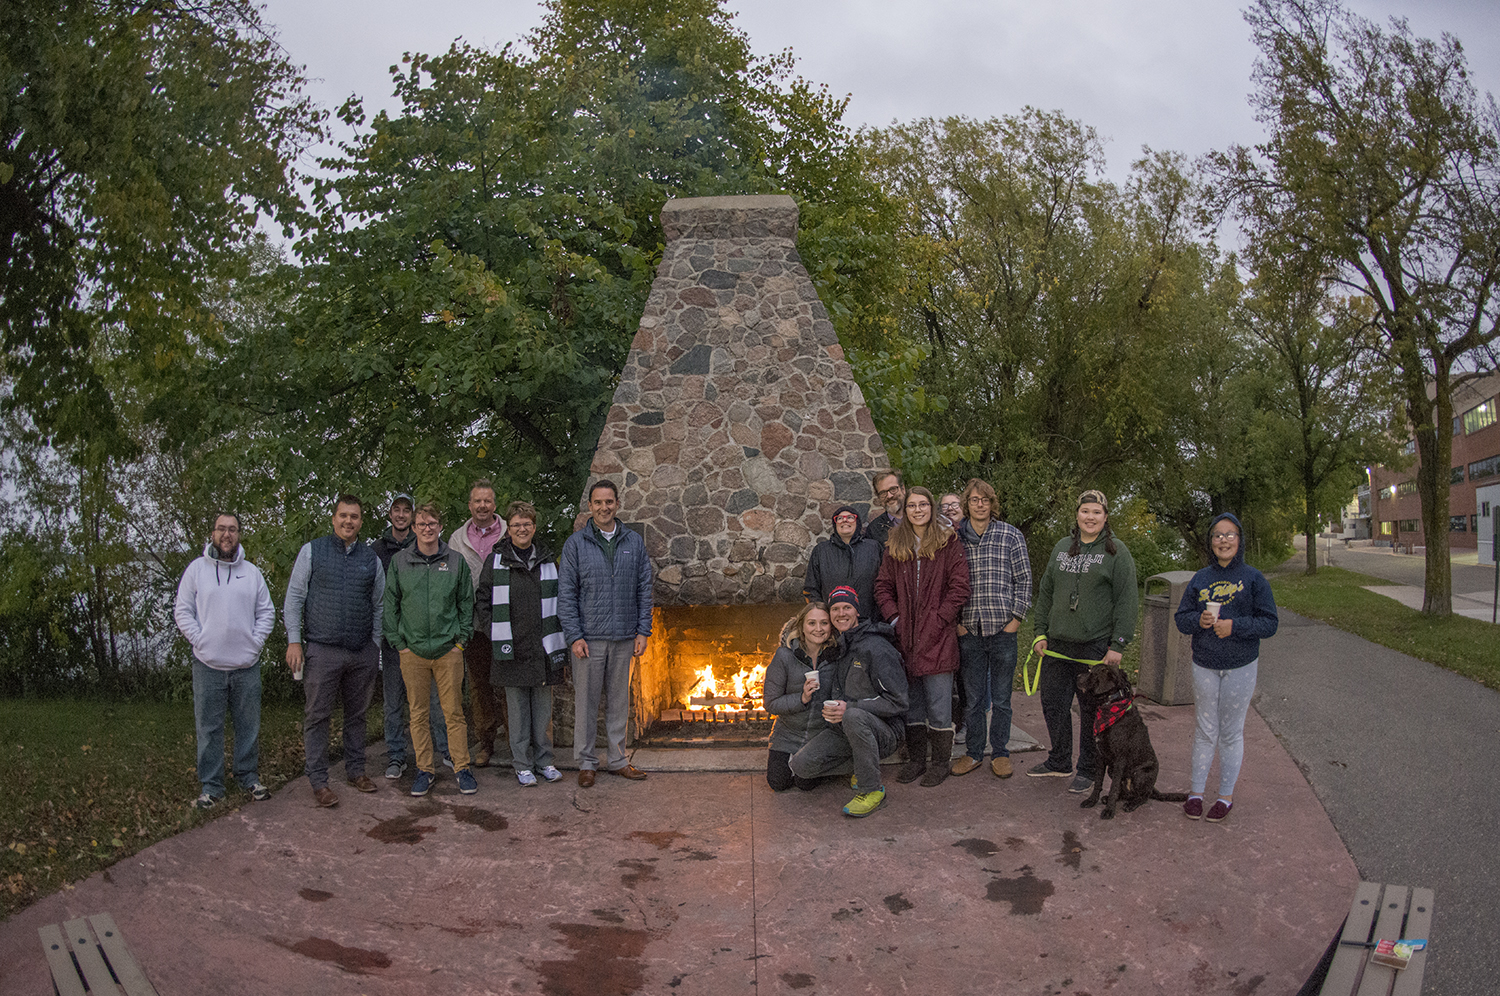 Friends and family of Bemidji State University gather around the first annual Homecoming Hearth.